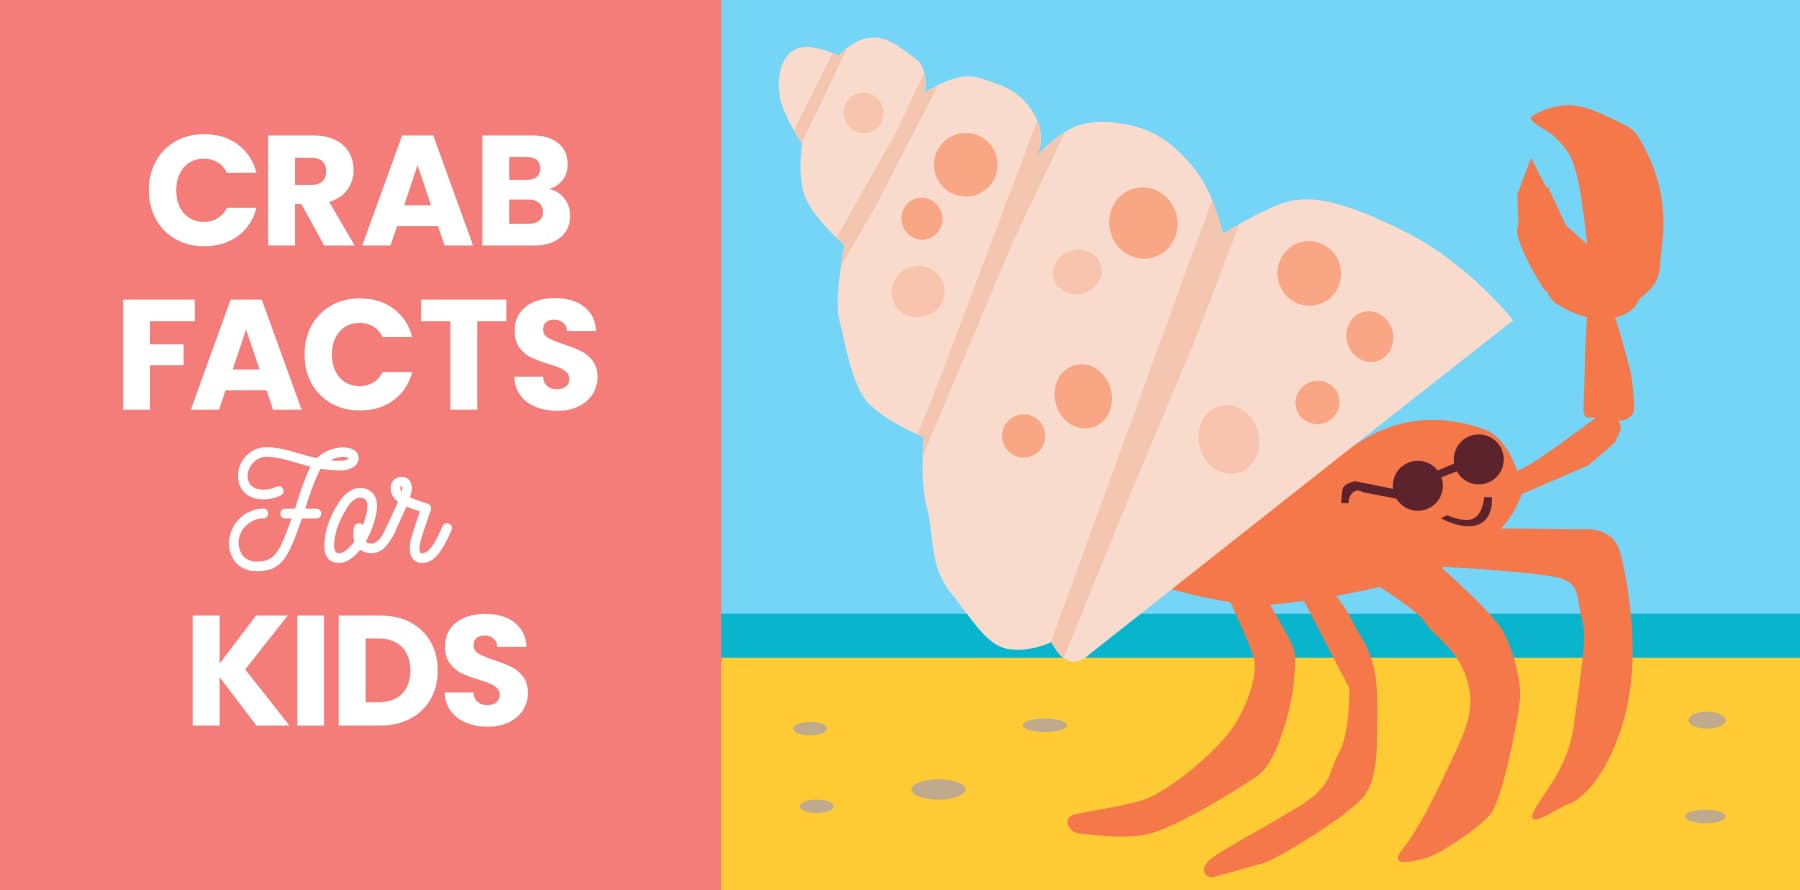 35 Crab Facts for Kids - Little Passports